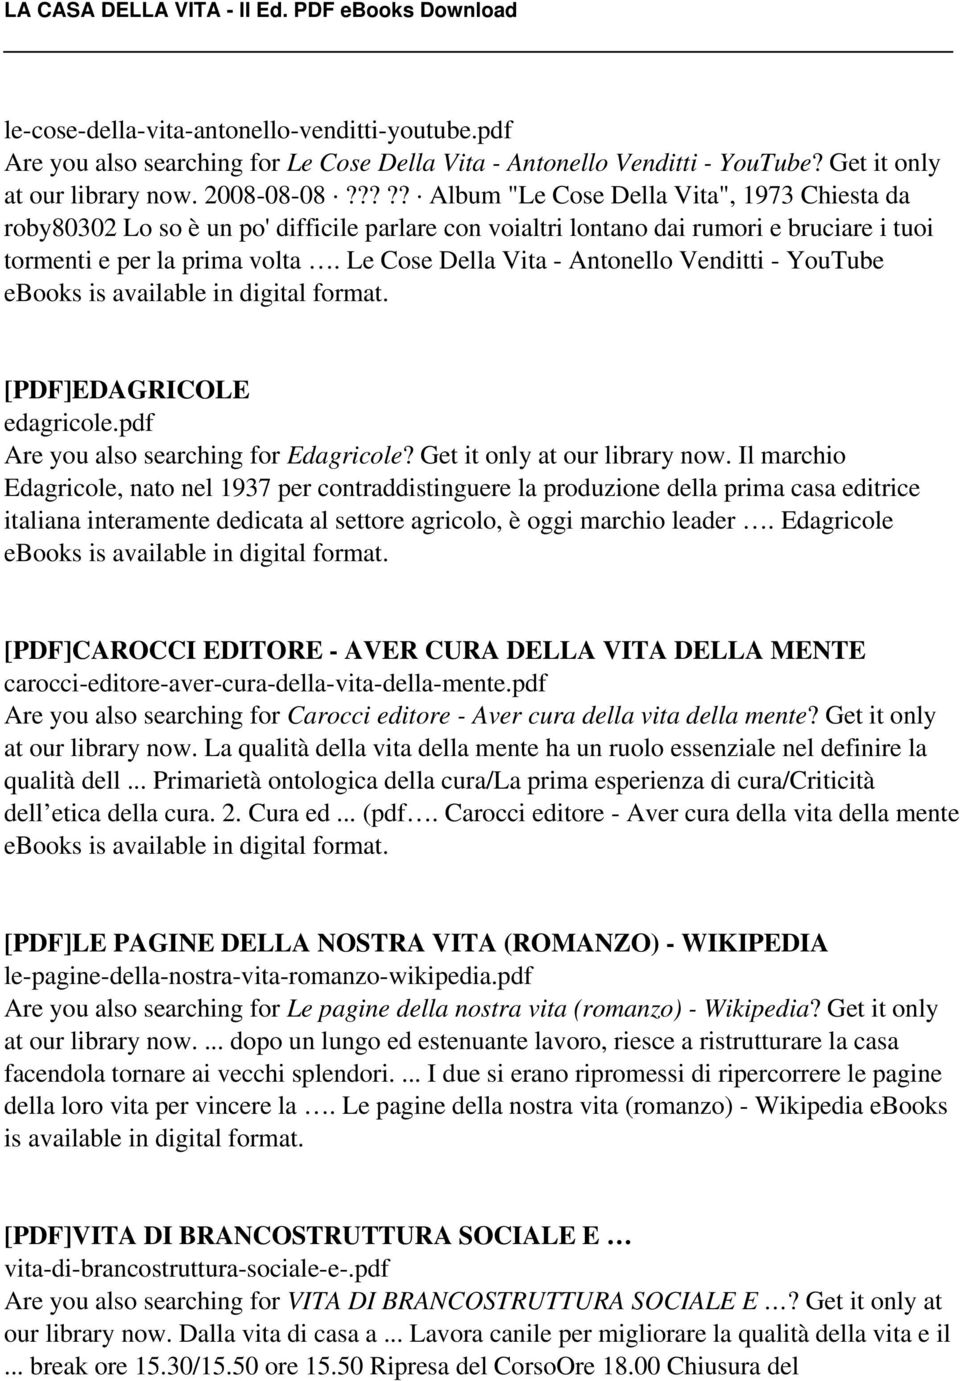 Le Cose Della Vita - Antonello Venditti - YouTube ebooks is available in digital format. [PDF]EDAGRICOLE edagricole.pdf Are you also searching for Edagricole? Get it only at our library now.